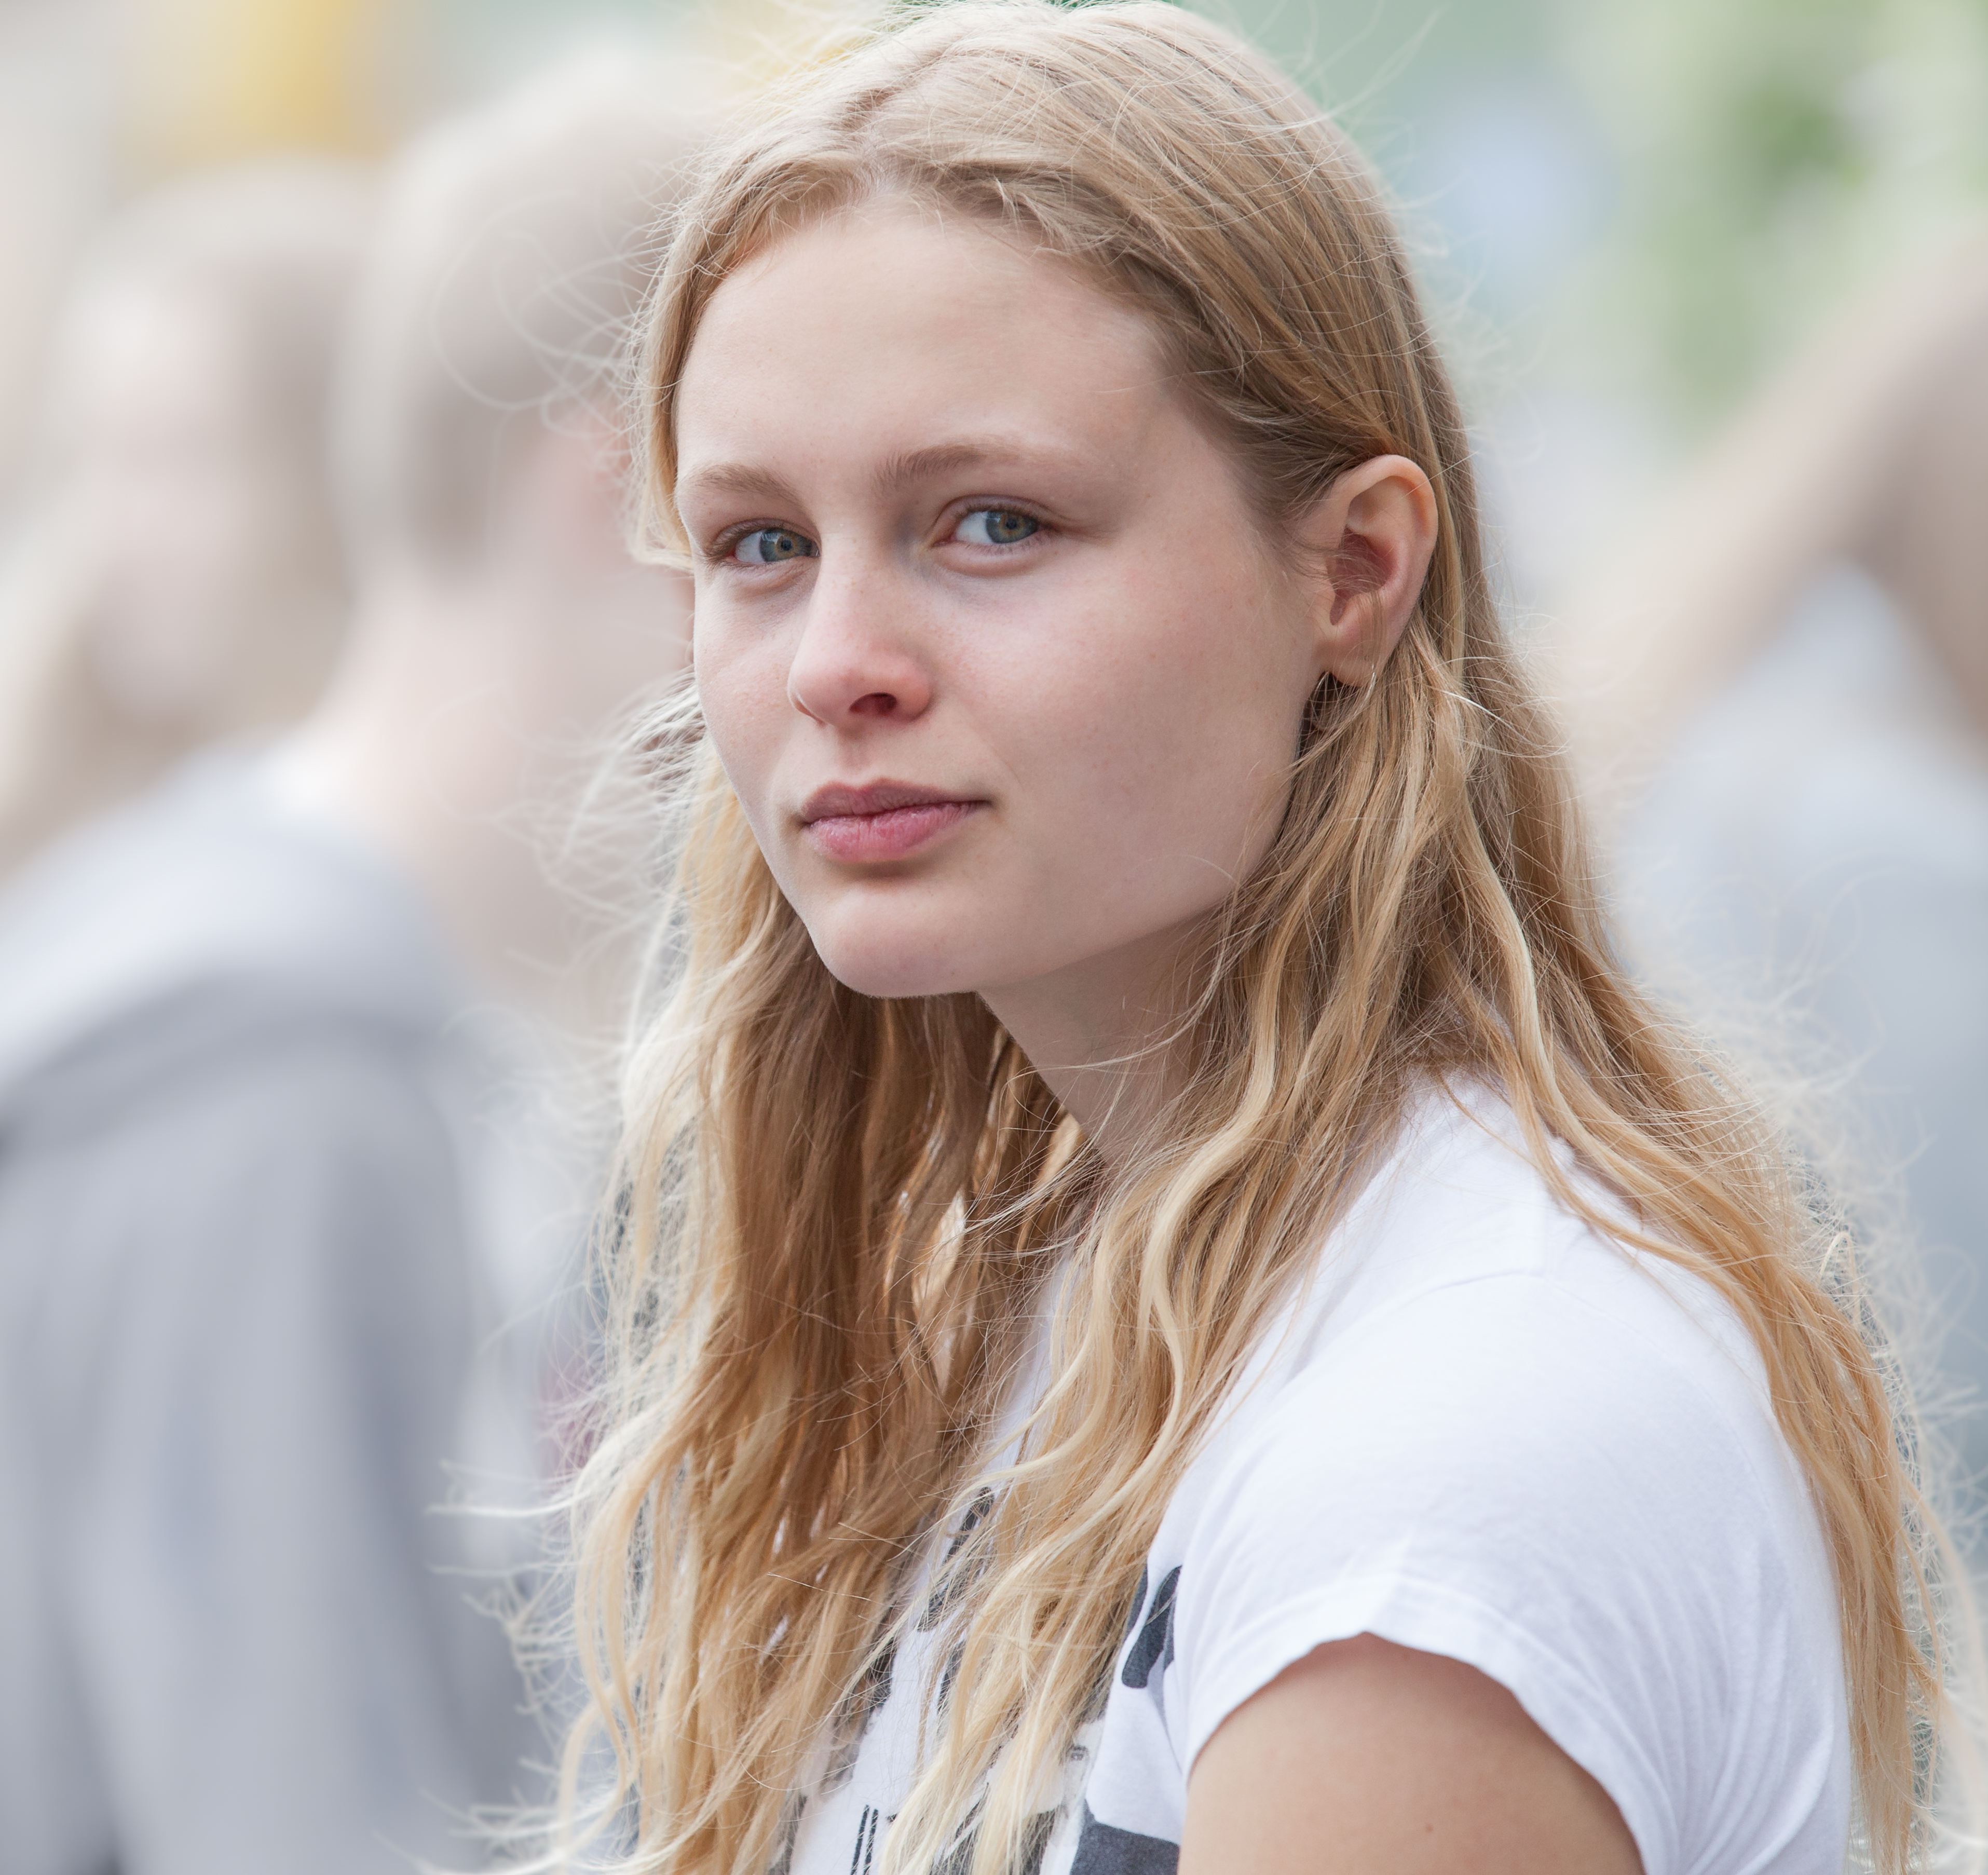 a creation of God - a cute fair-haired girl in Copenhagen, Denmark, in June 2014, picture 37